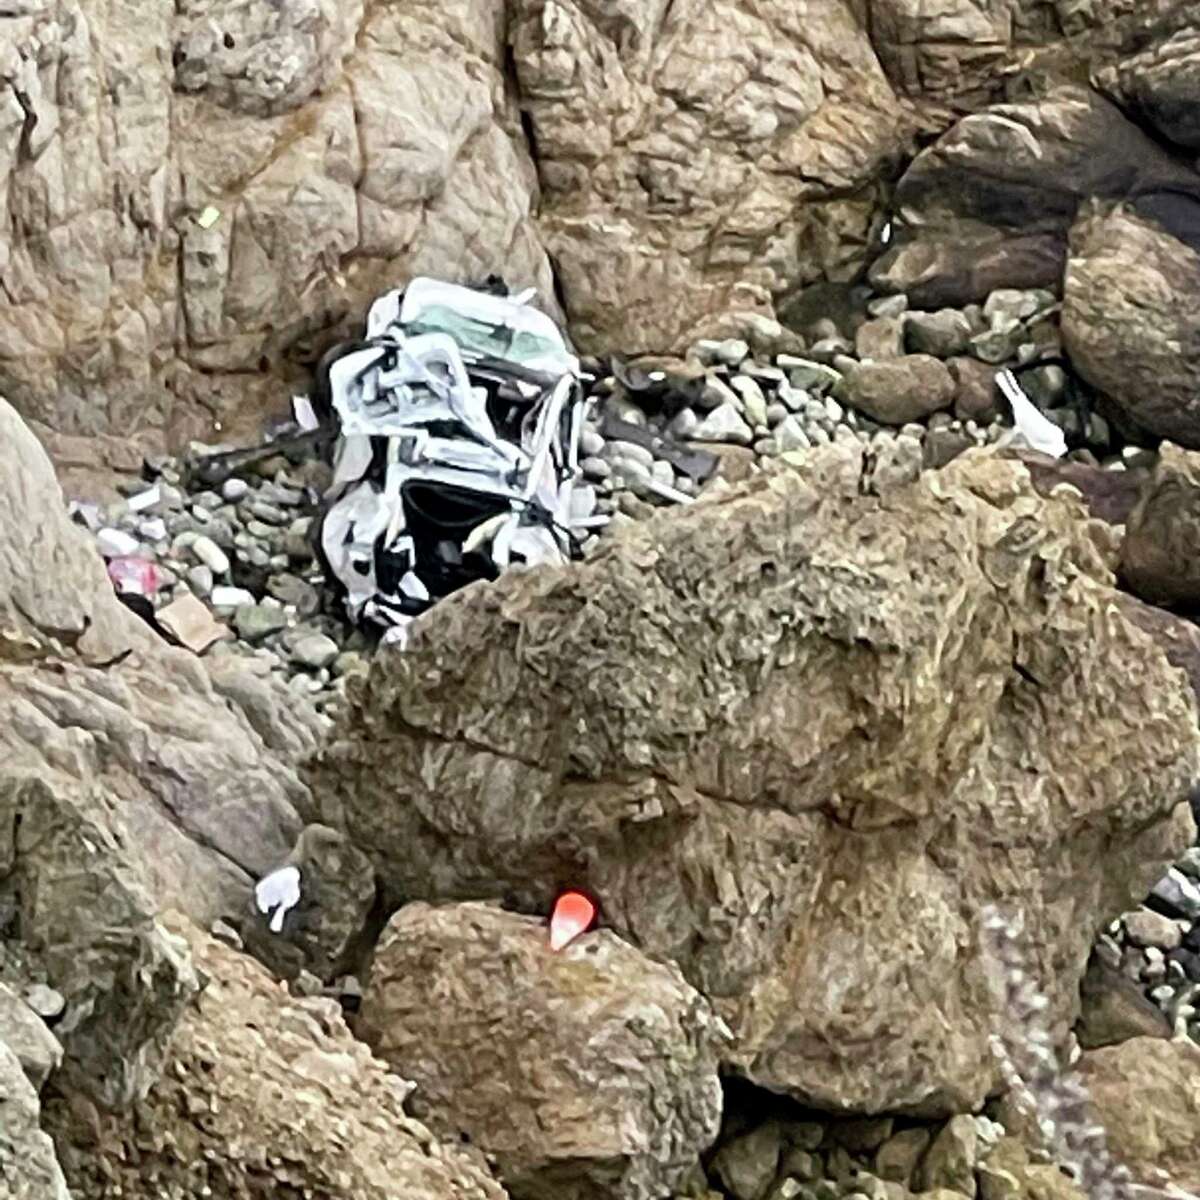 California Highway Patrol has handed over to the San Mateo County District Attorney its investigation into a man who allegedly drove his Tesla intentionally off of cliff with his children and wife aboard on Jan. 2. The crash occurred along the Pacific Coast Highway on a section known as Devil’s Slide. (San Mateo County Sheriff's Office via AP, File)